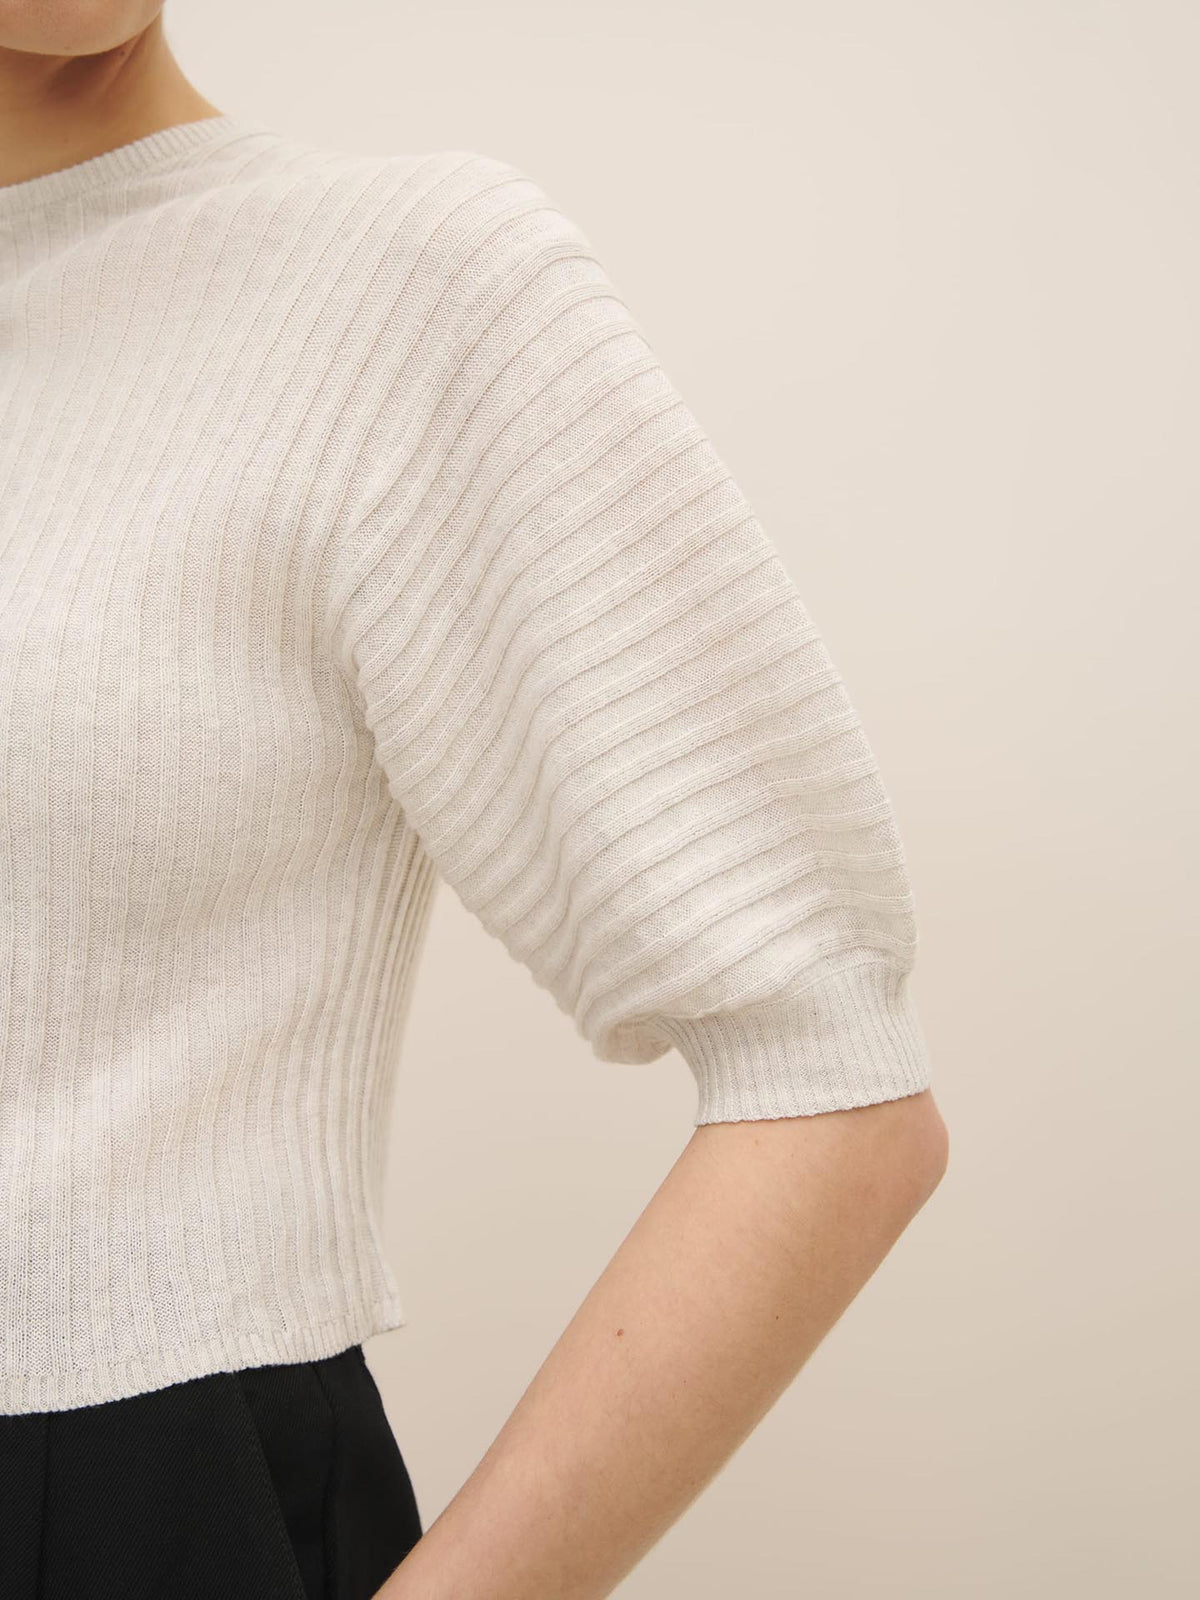 A person wearing a Kowtow Quinn Top - Light Marle, an ethically made white ribbed sweater with a three-quarter sleeve, standing against an off-white background.